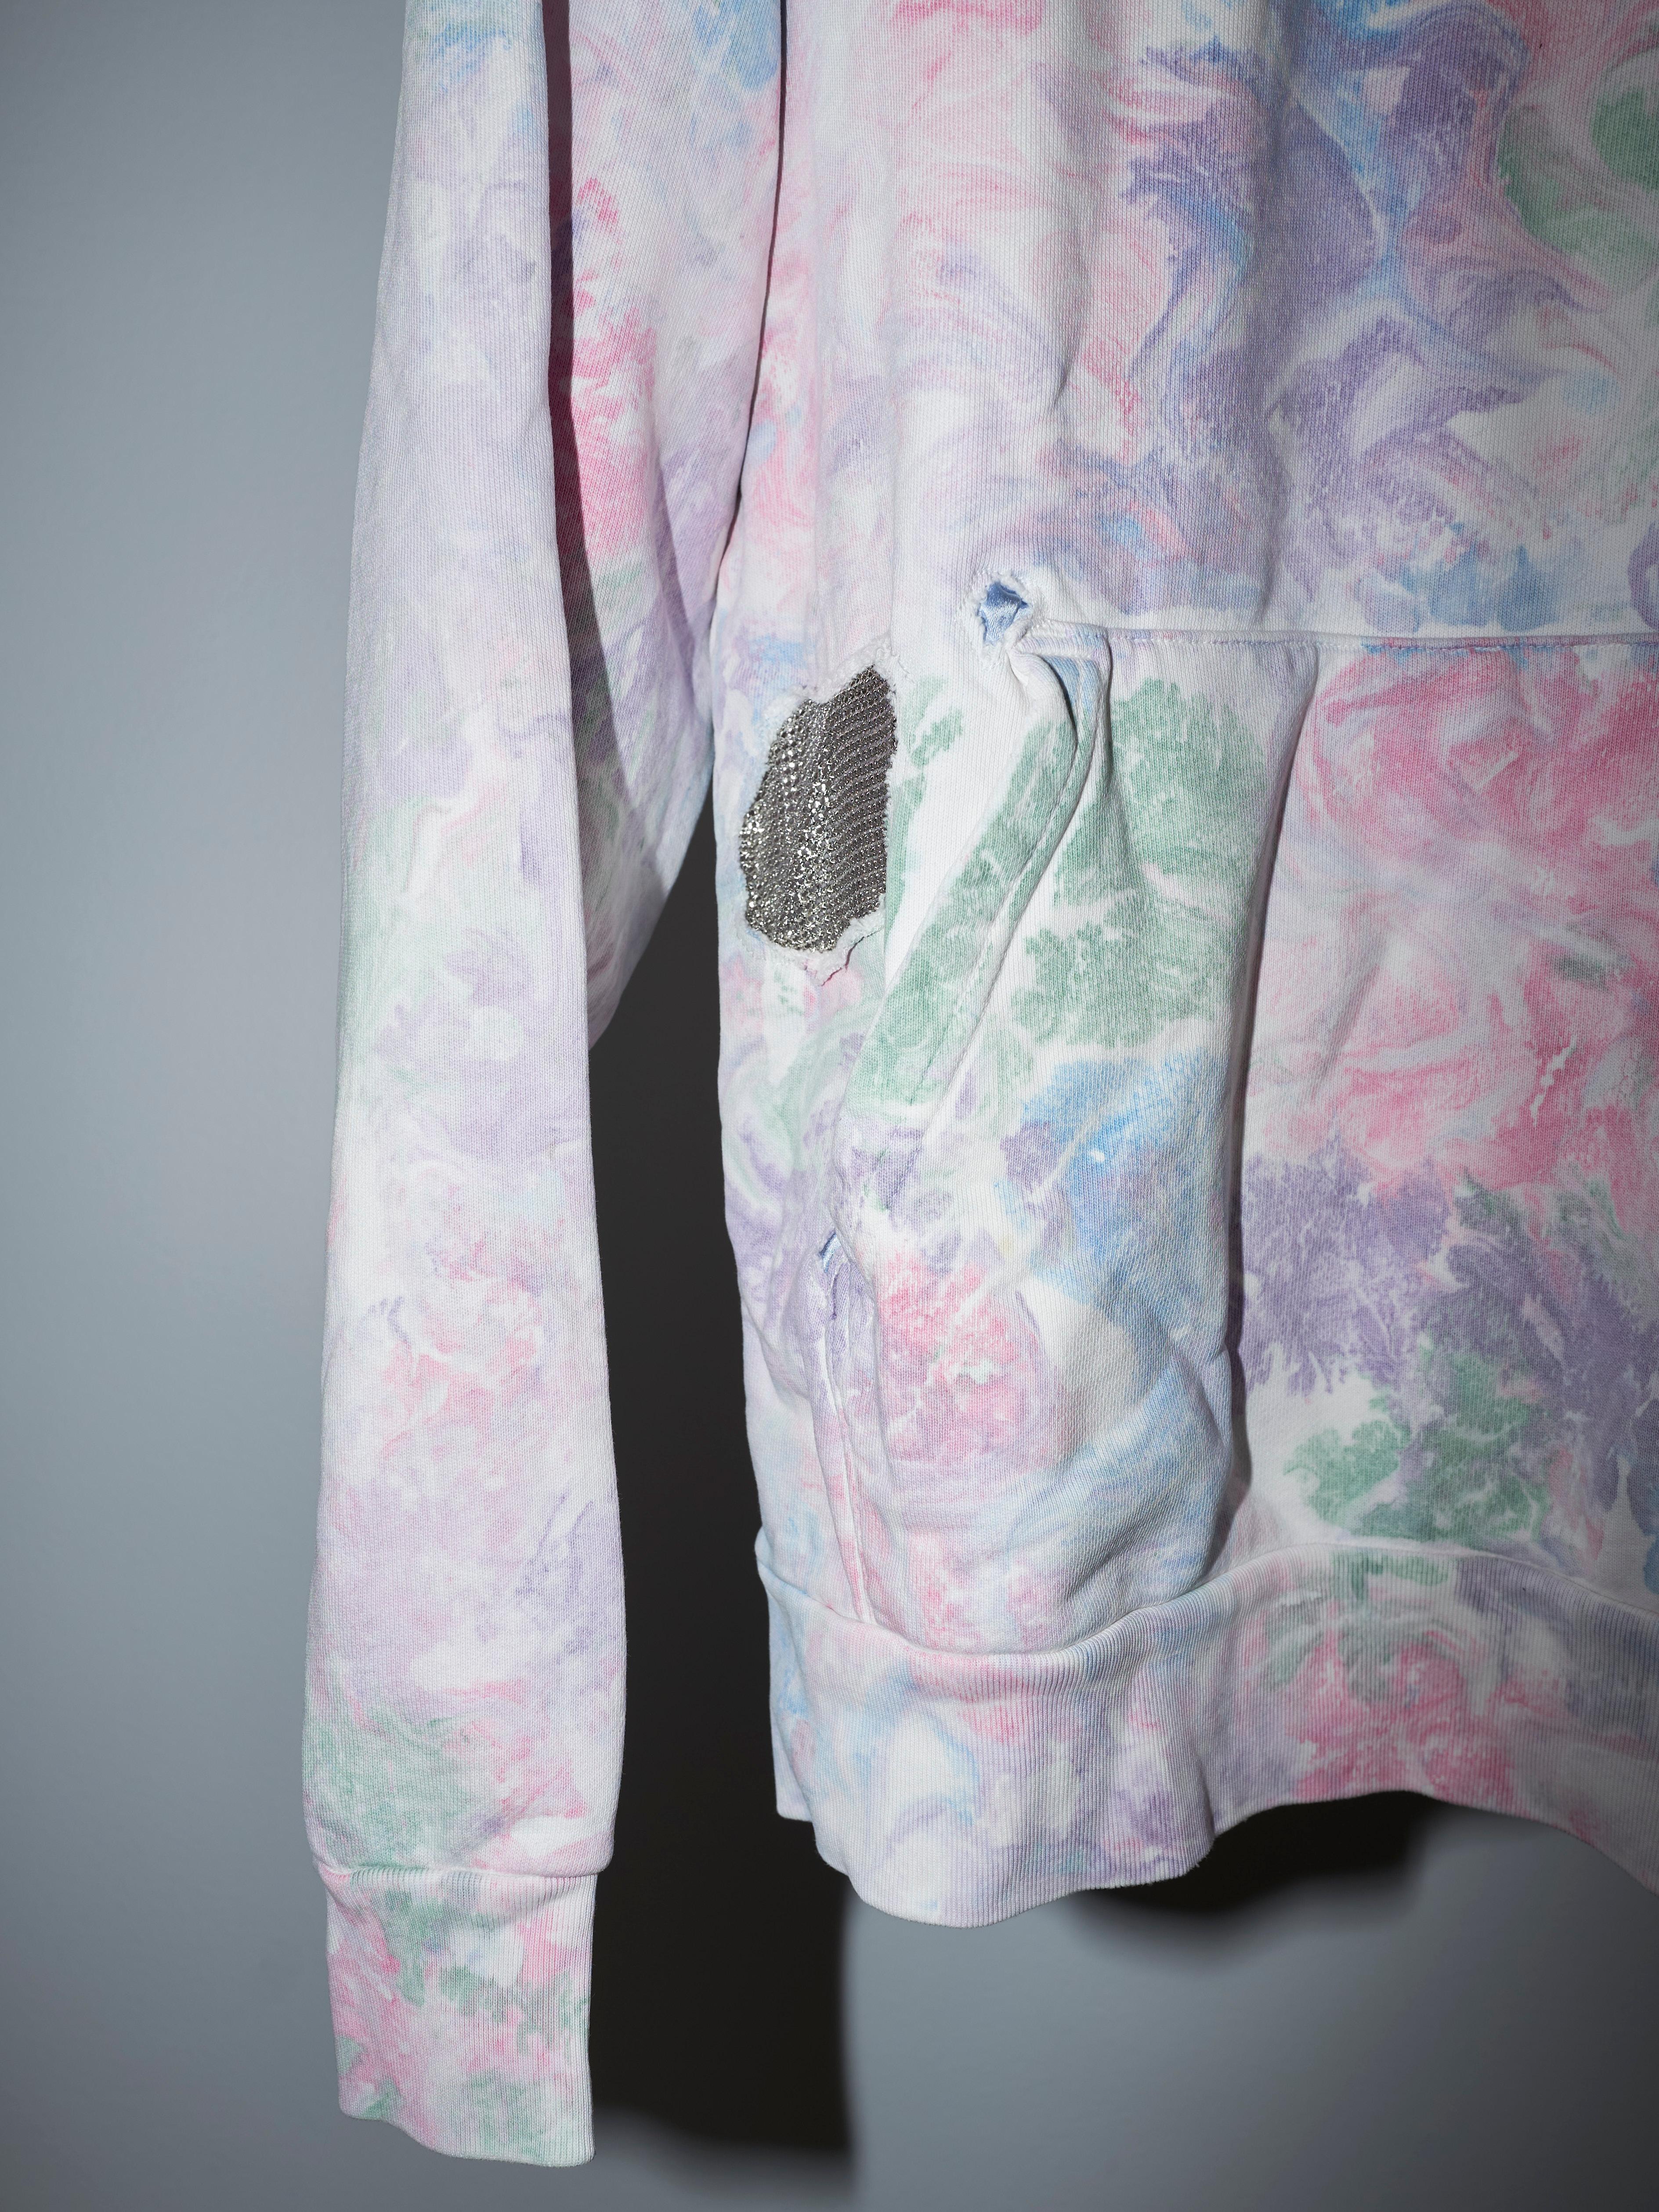 Hoodie Pastel Marble Cotton Embellished Chain Patchwork J Dauphin For Sale 1